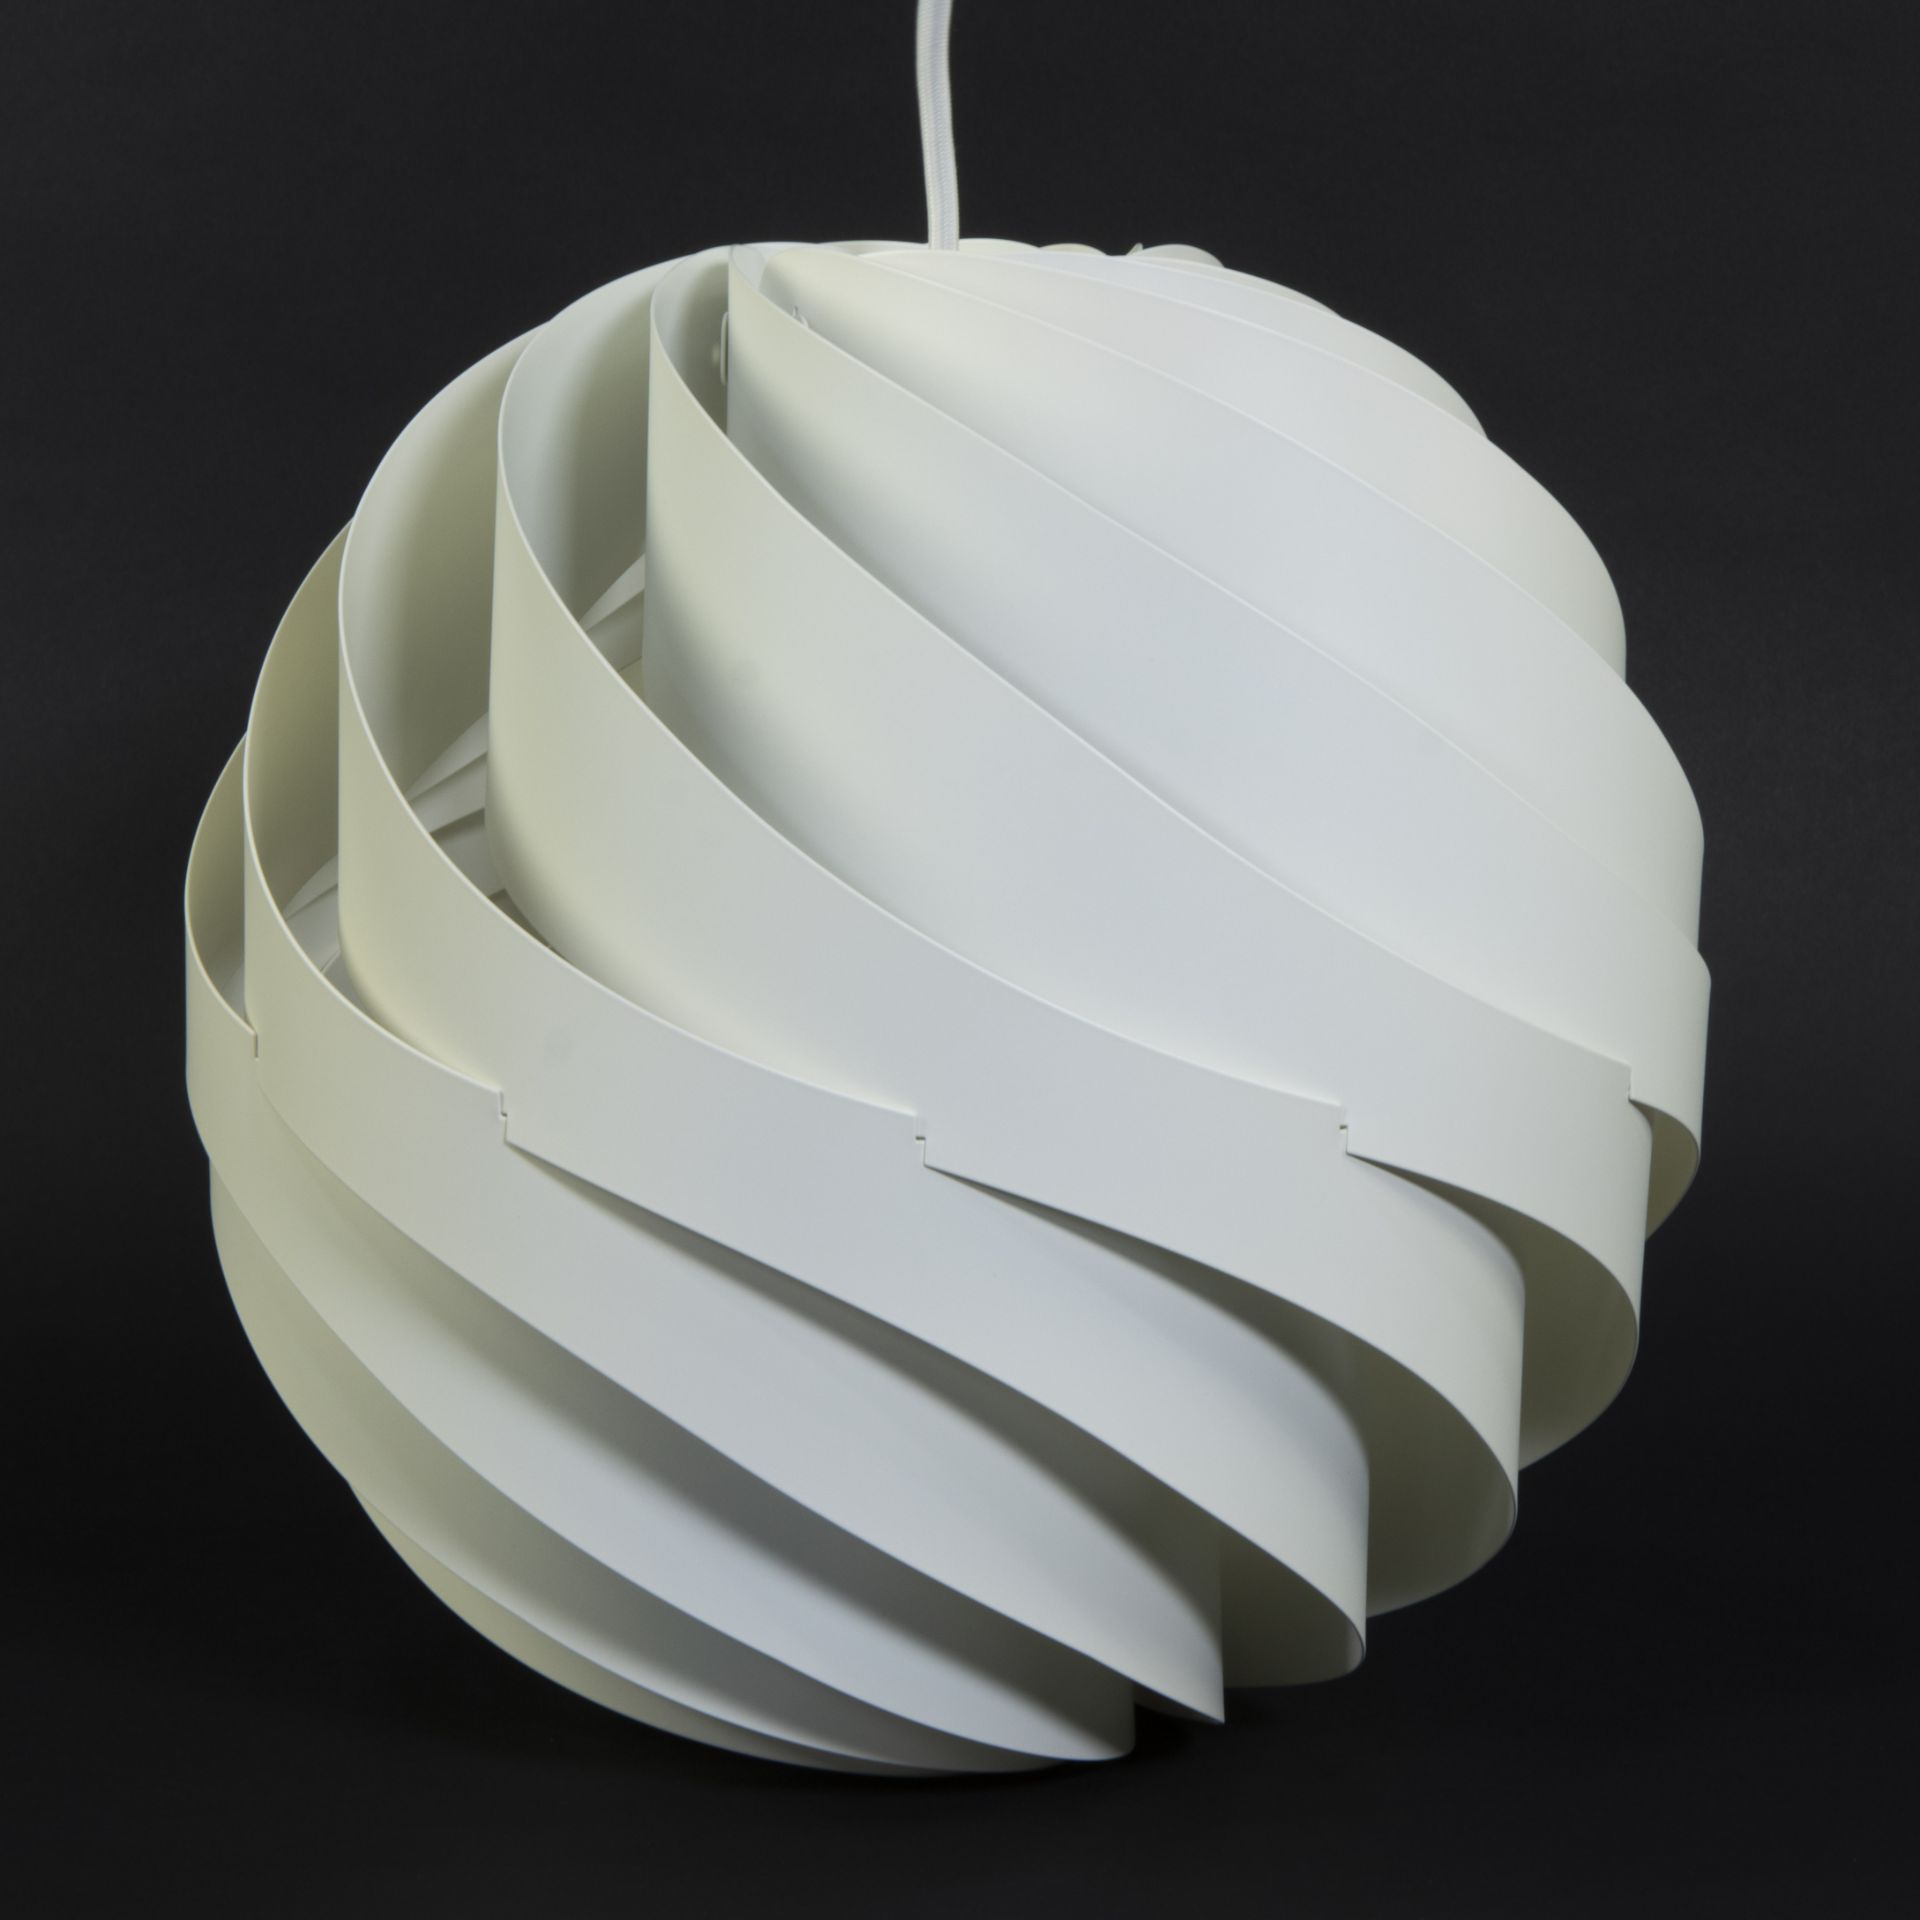 Turbo light in white aluminium from Bald & Bang, designed by Louis Weisdorf